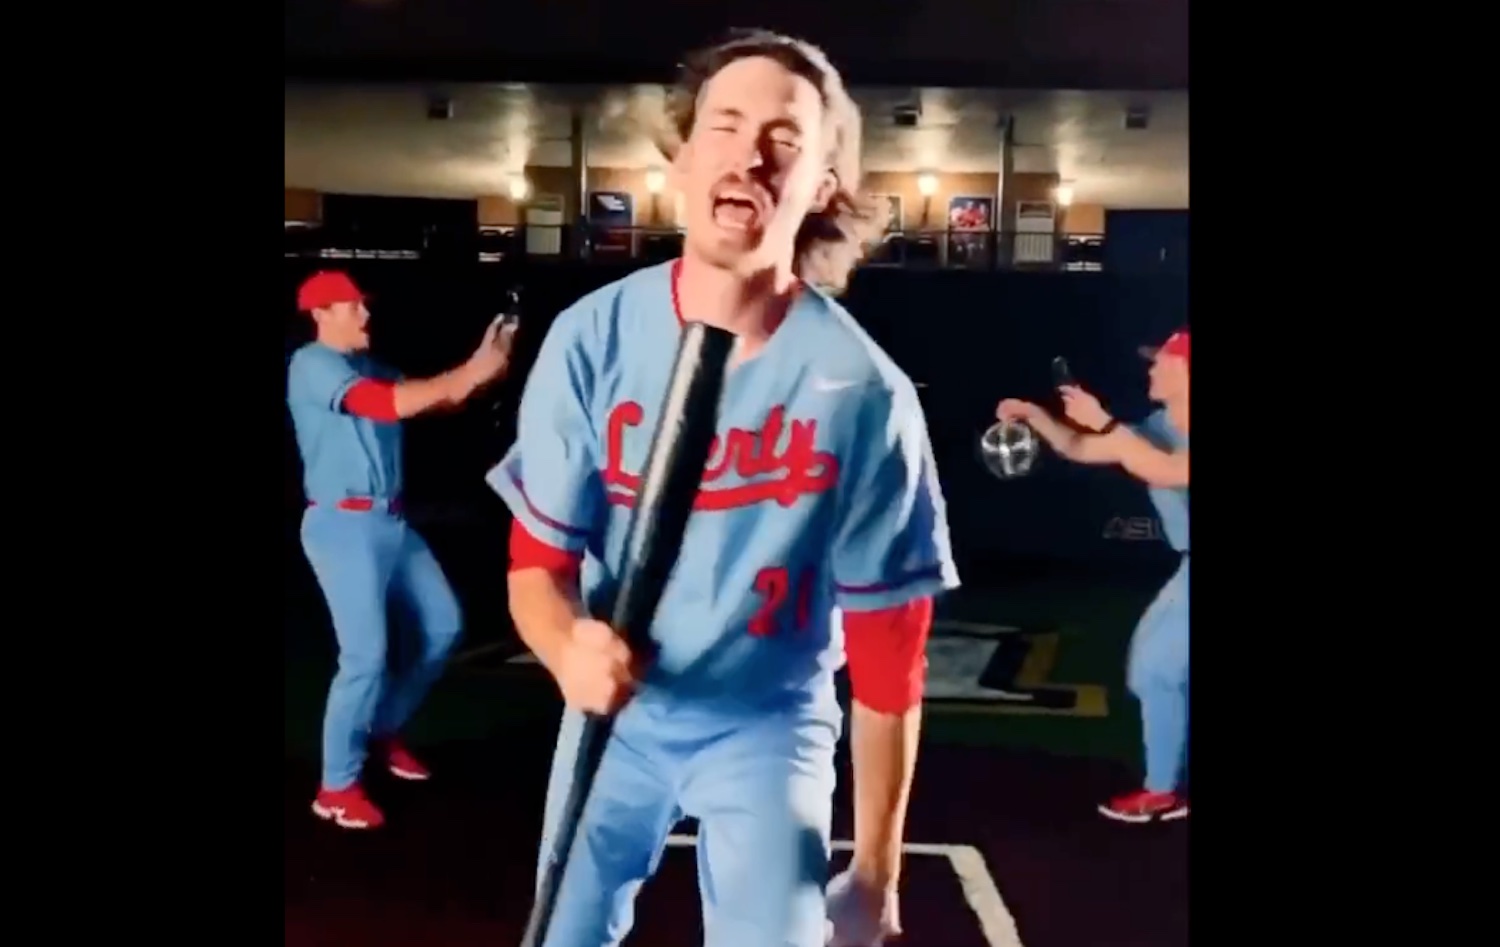 It was honestly a disaster': Behind the scenes of the Liberty University  baseball team's viral Céline Dion uniform reveal - The Athletic